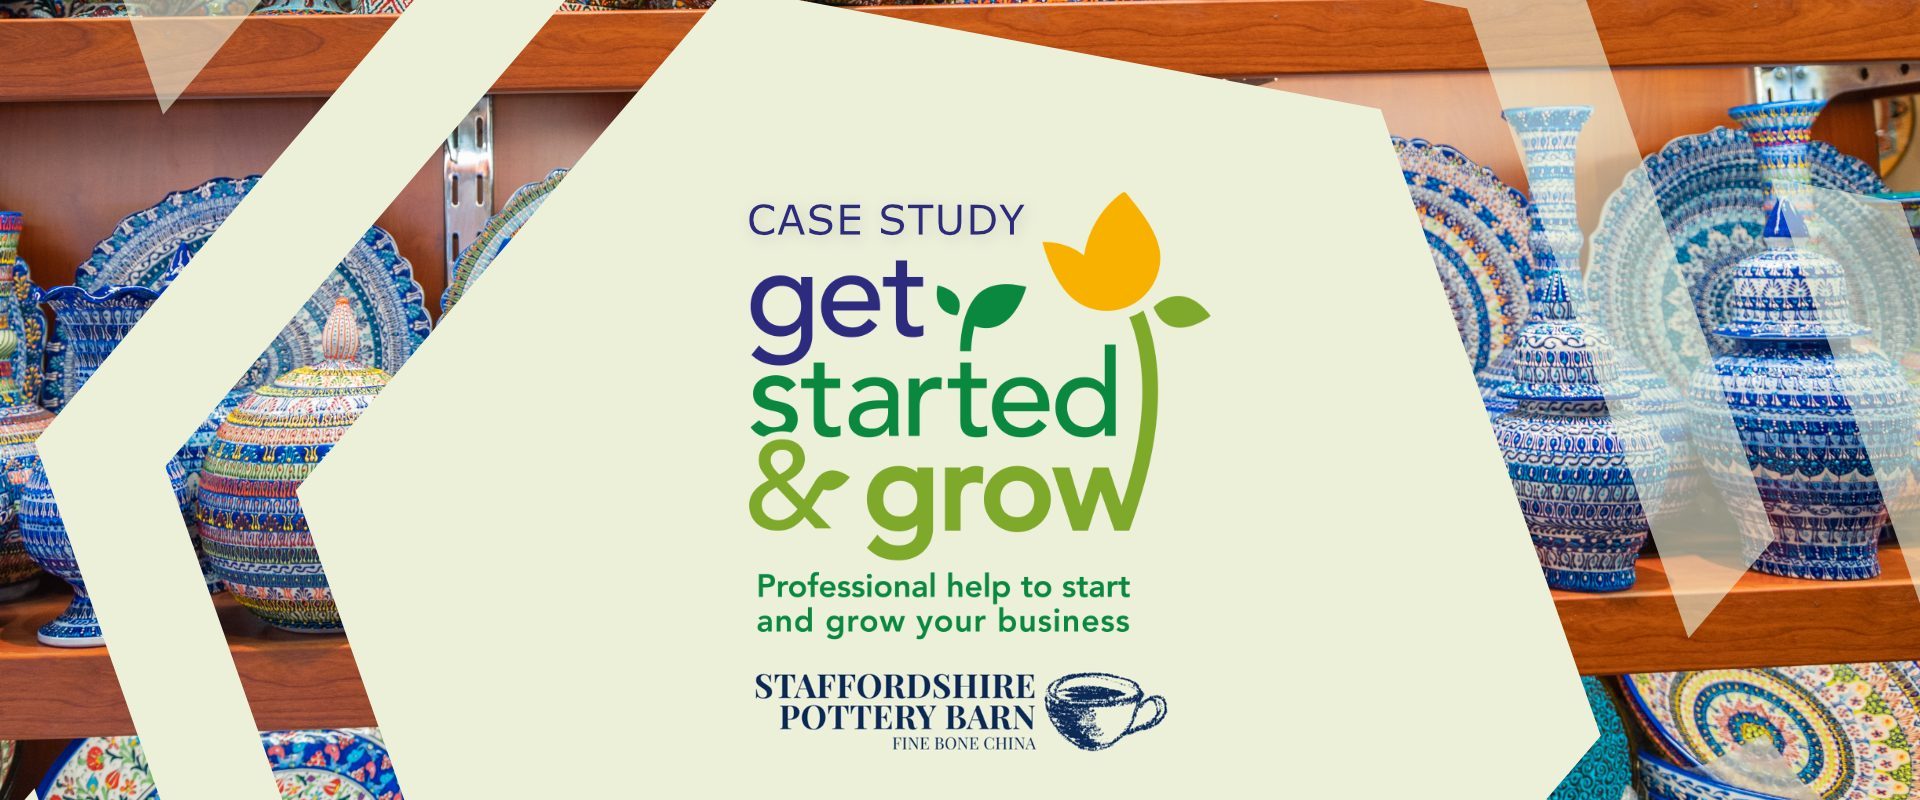 Staffordshire Pottery Barn praises Get Started and Grow support